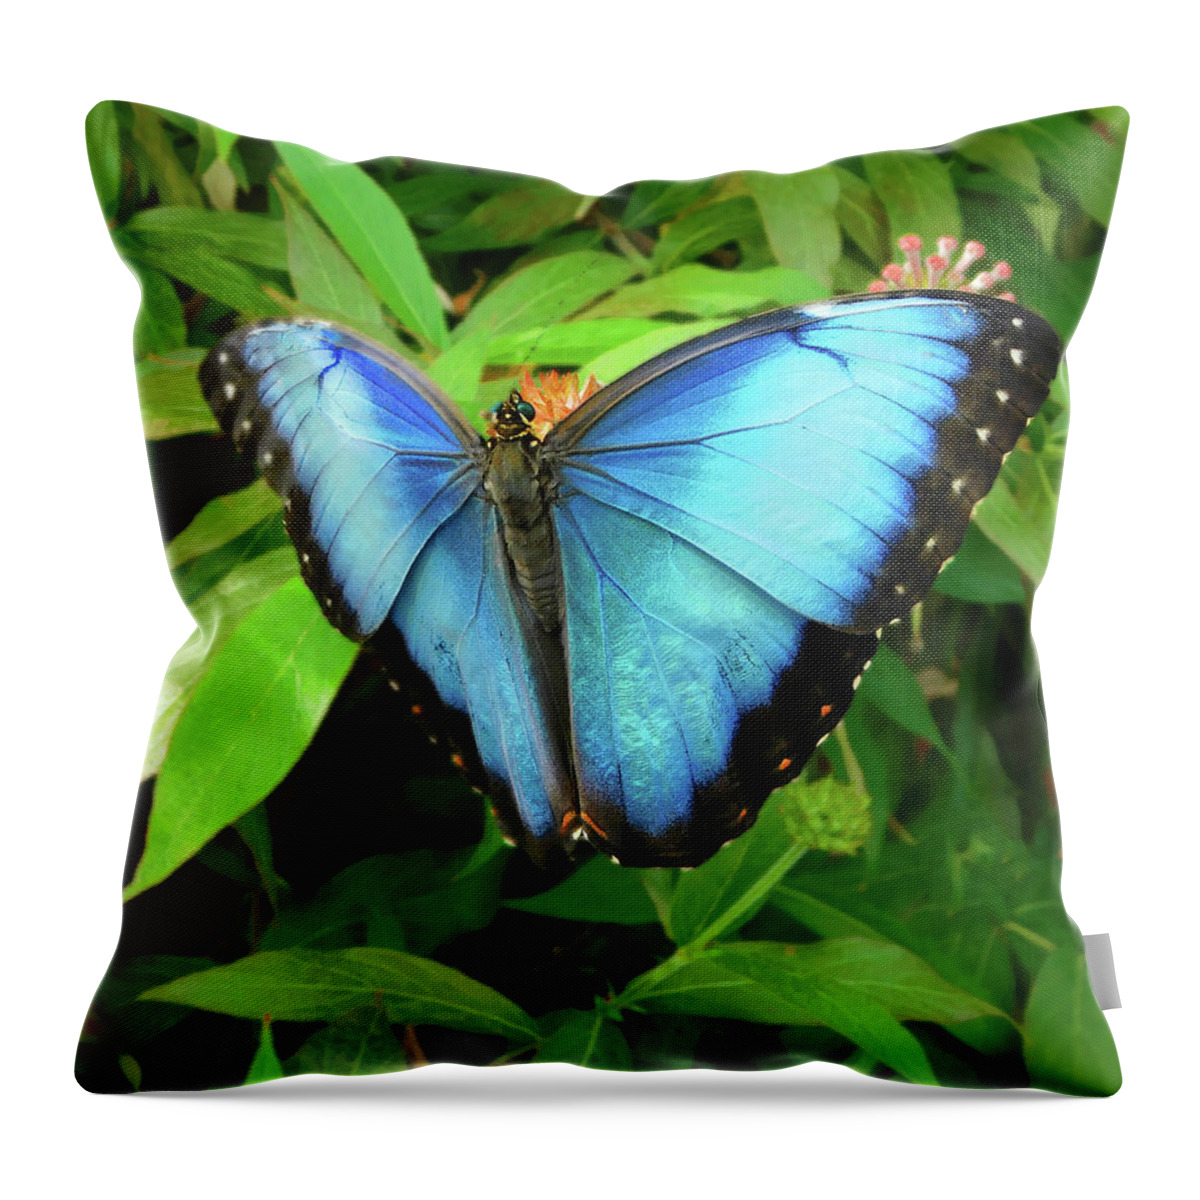 Butterfly Throw Pillow featuring the photograph Peleides Blue Morpho Butterfly by Emmy Marie Vickers